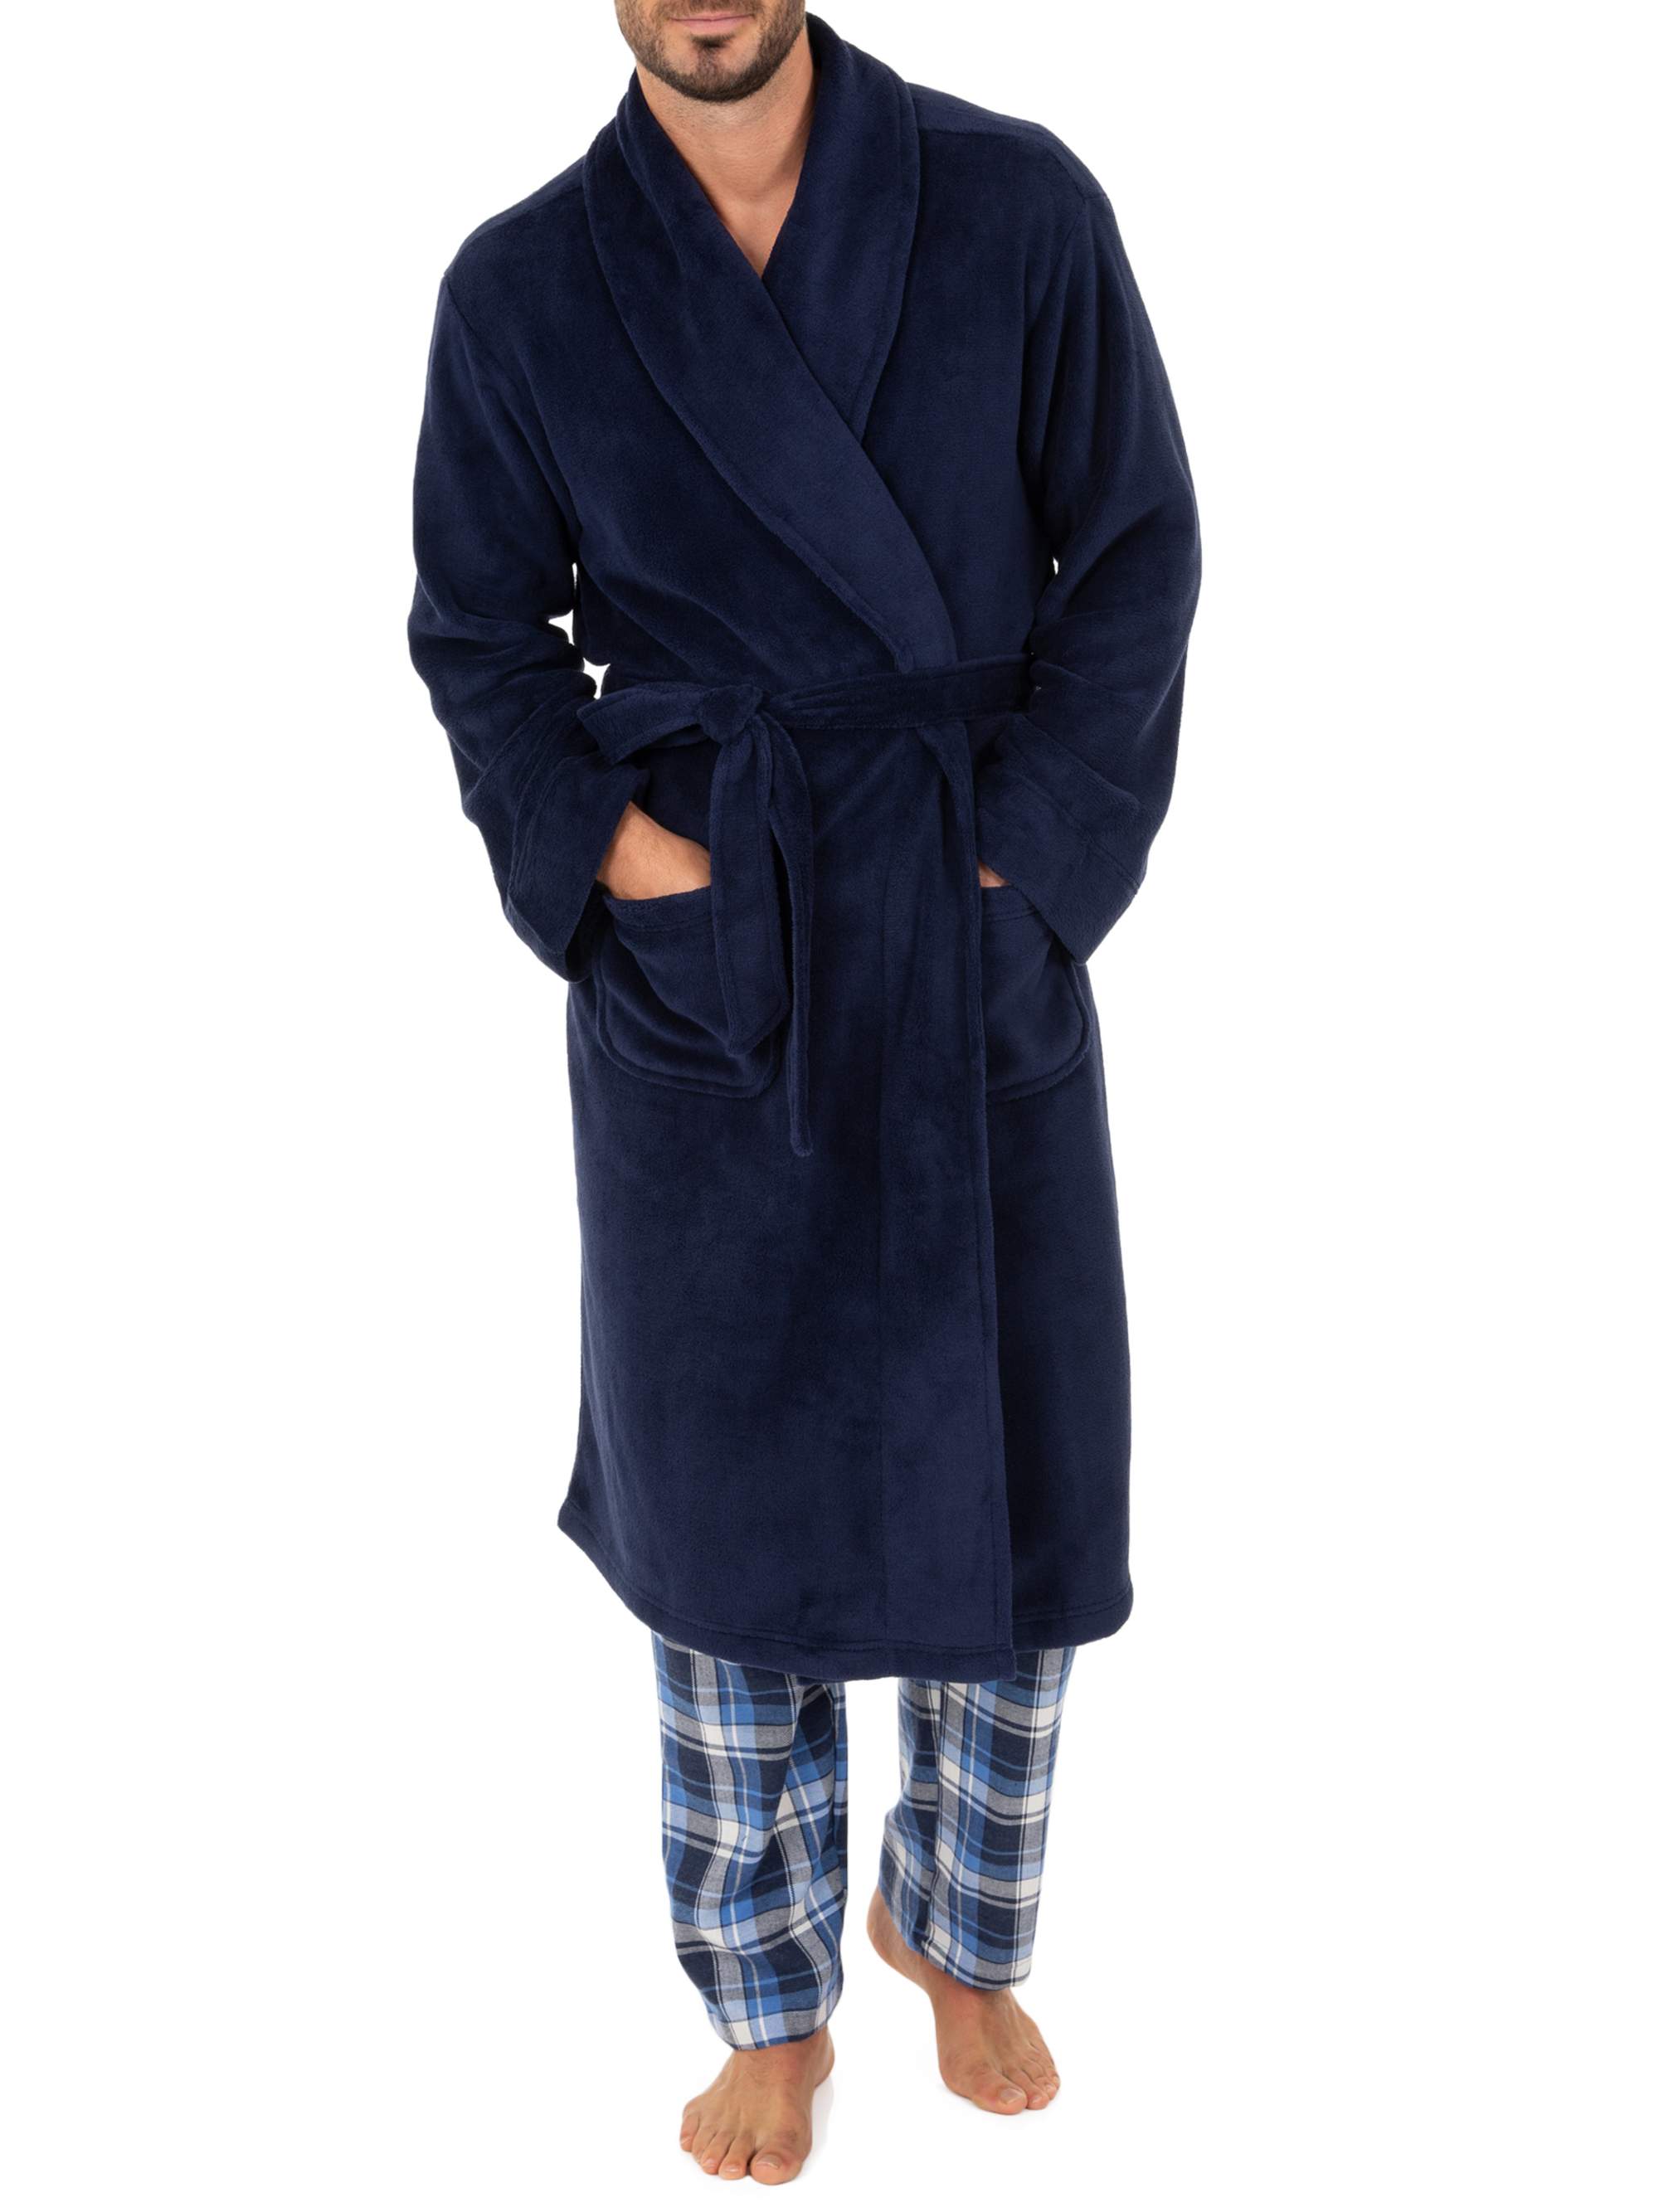 Fruit of the Loom Adult Mens Solid Plush Fleece Bathrobe One Size - image 1 of 5